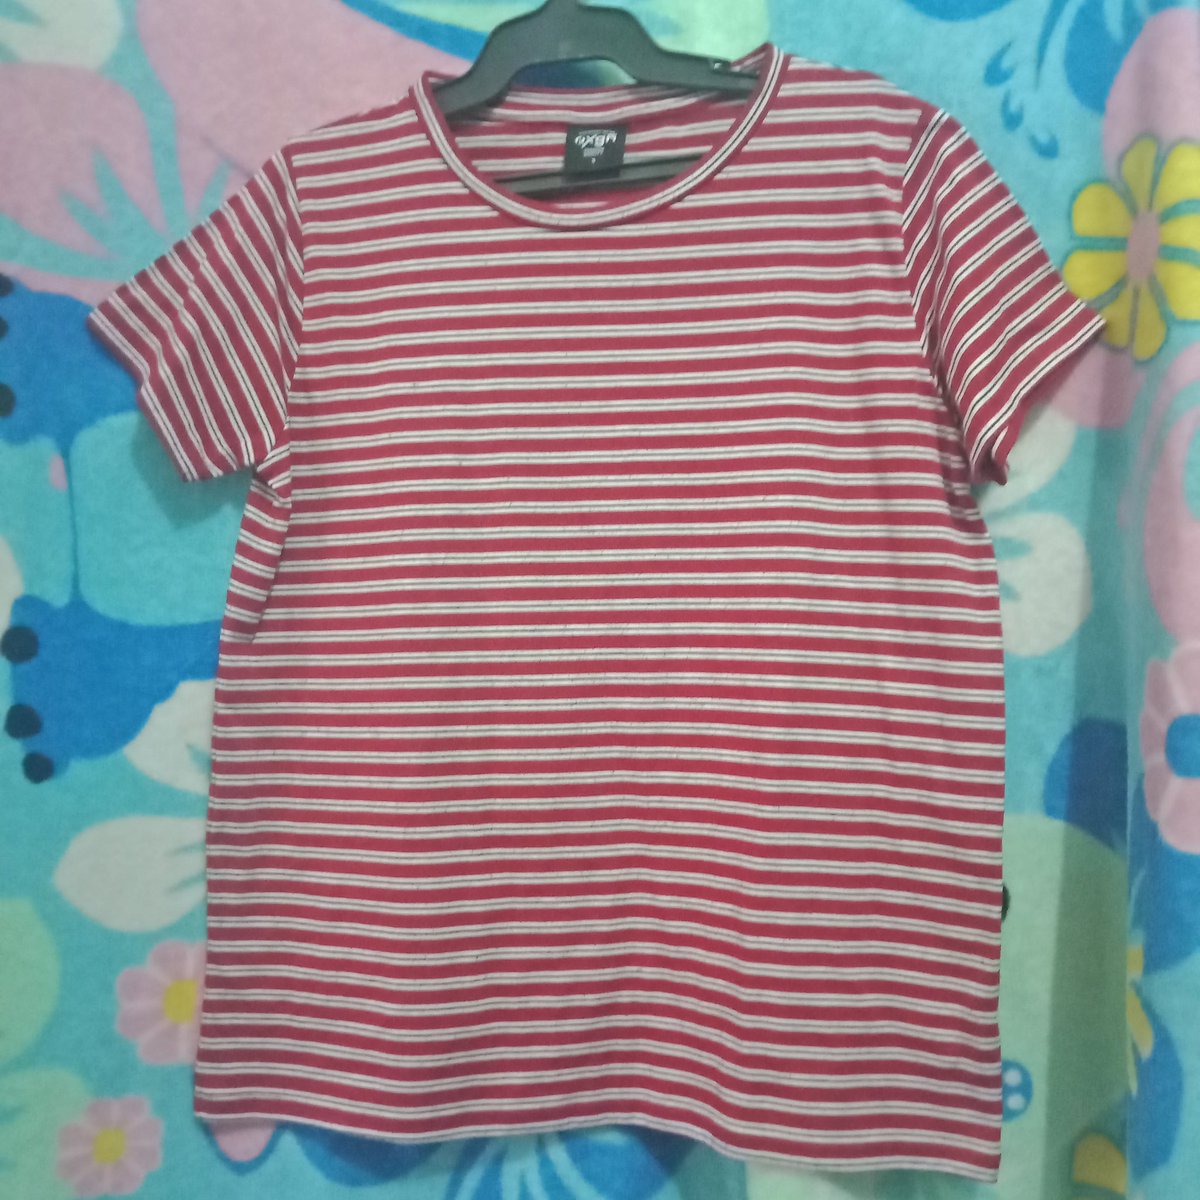 OXYGEN striped tee80 pesosSize s on tag